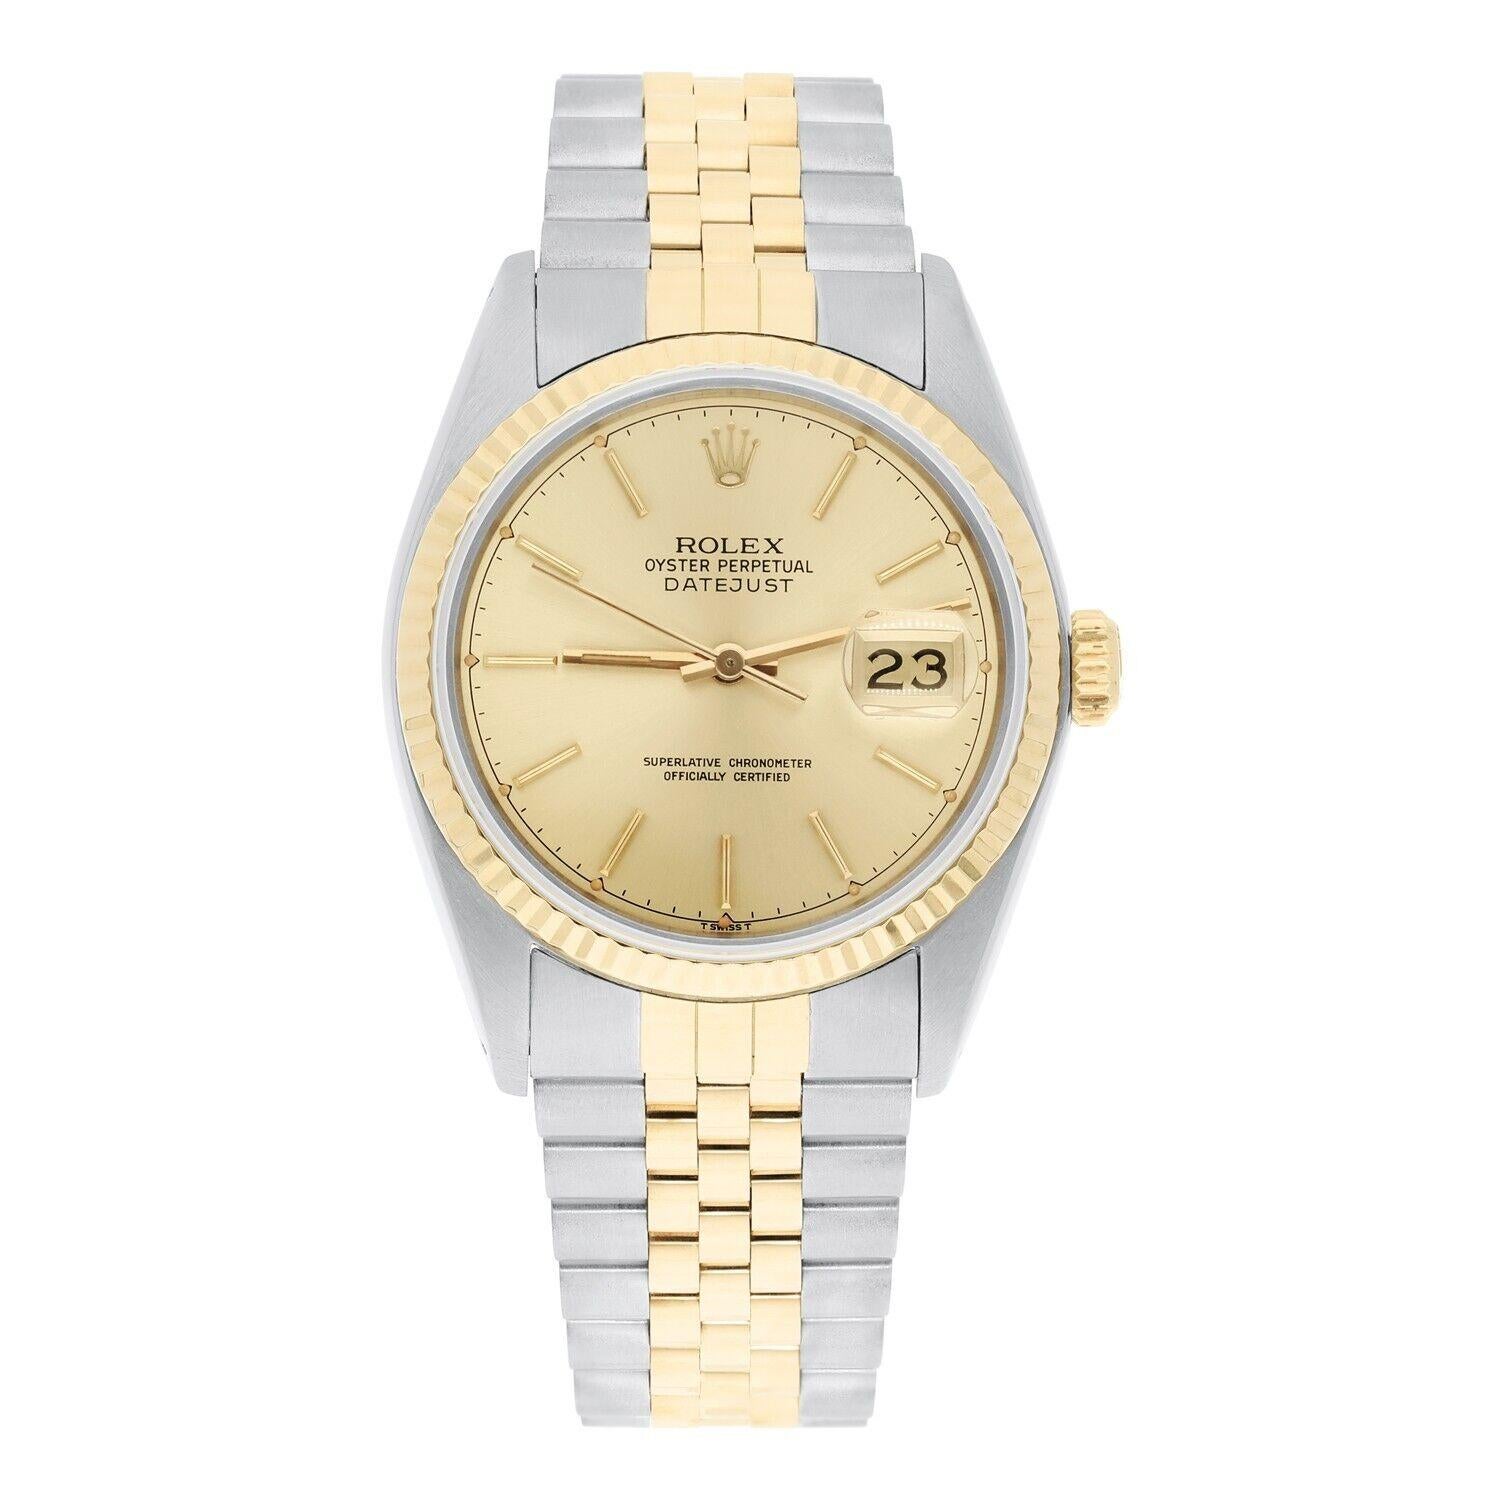 This watch has been professionally polished, serviced and is in excellent overall condition. There are absolutely no visible scratches or blemishes. Model features quick-set movement. Authenticity guaranteed! The sale comes with a Rolex box, papers